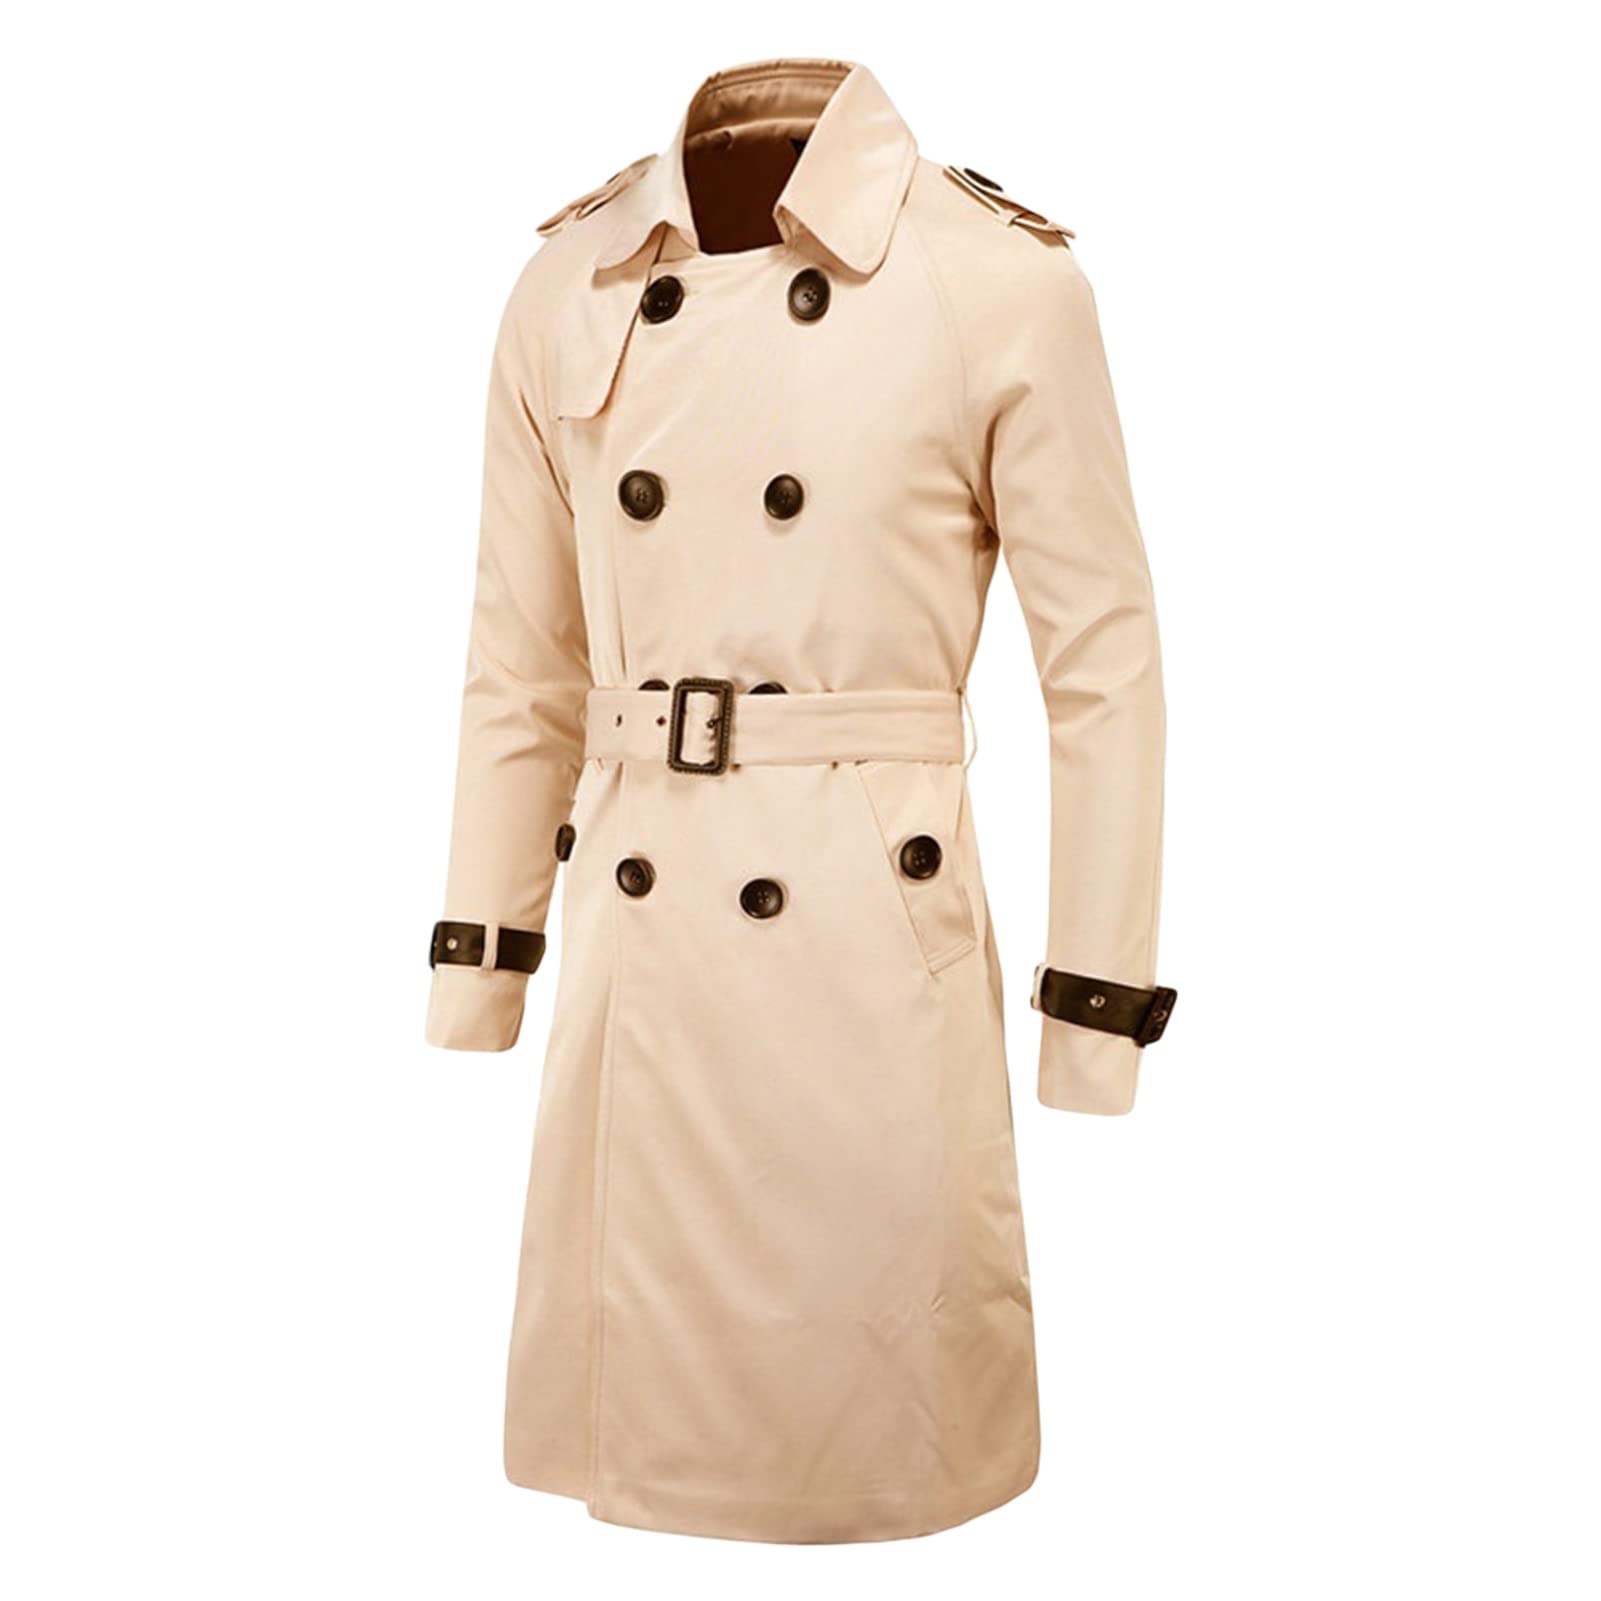 Maiyifu-GJ Men's Double Breasted Trench Coat Stylish Slim Fit Mid Long Belted Windbreaker Lapel Military Jacket with Belt